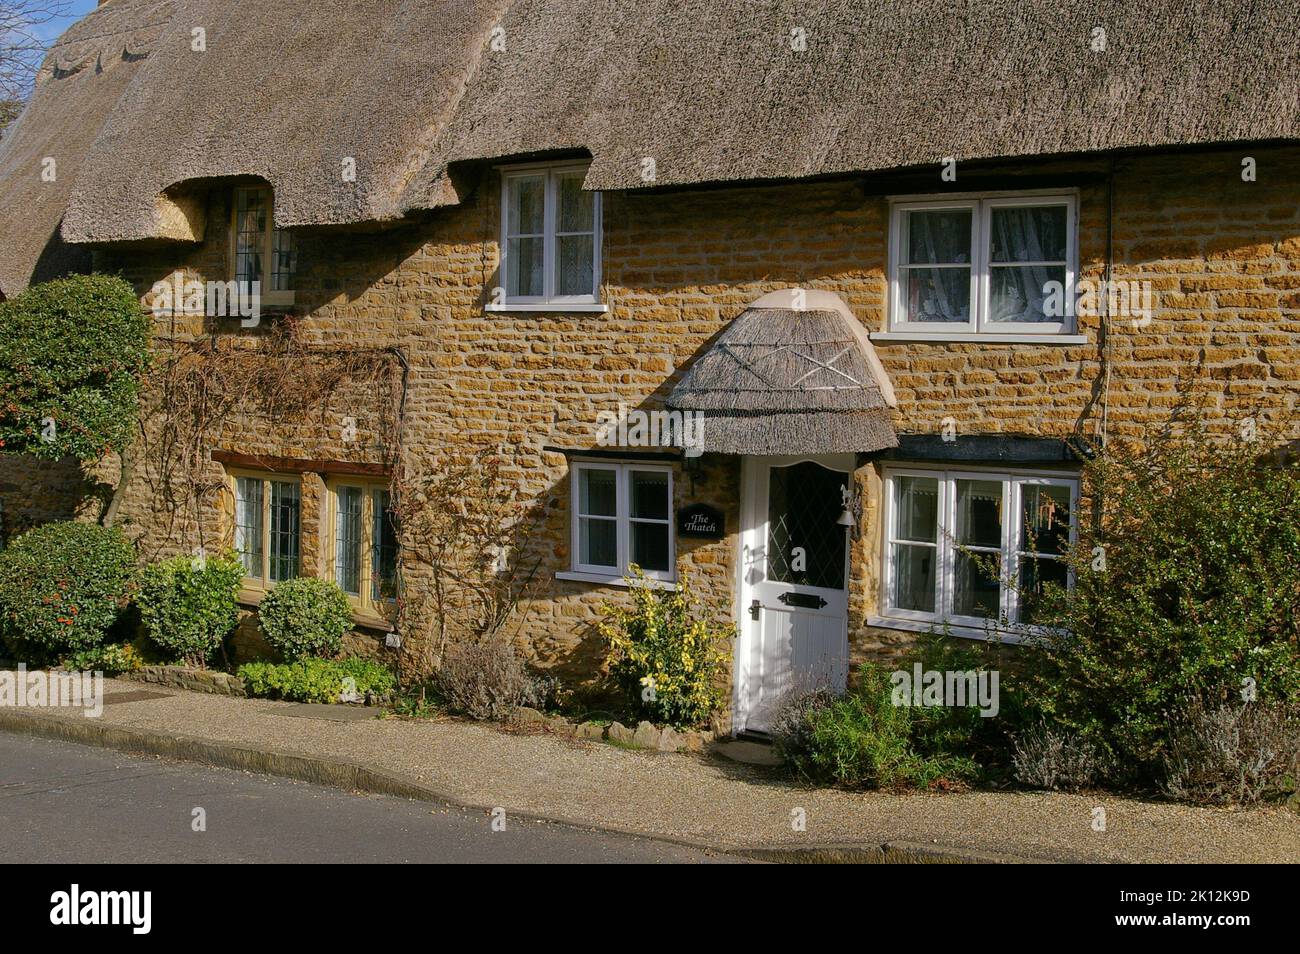 Pretty stone built thatched cottage in the village of Boughton, Northamptonshire, UK Stock Photo